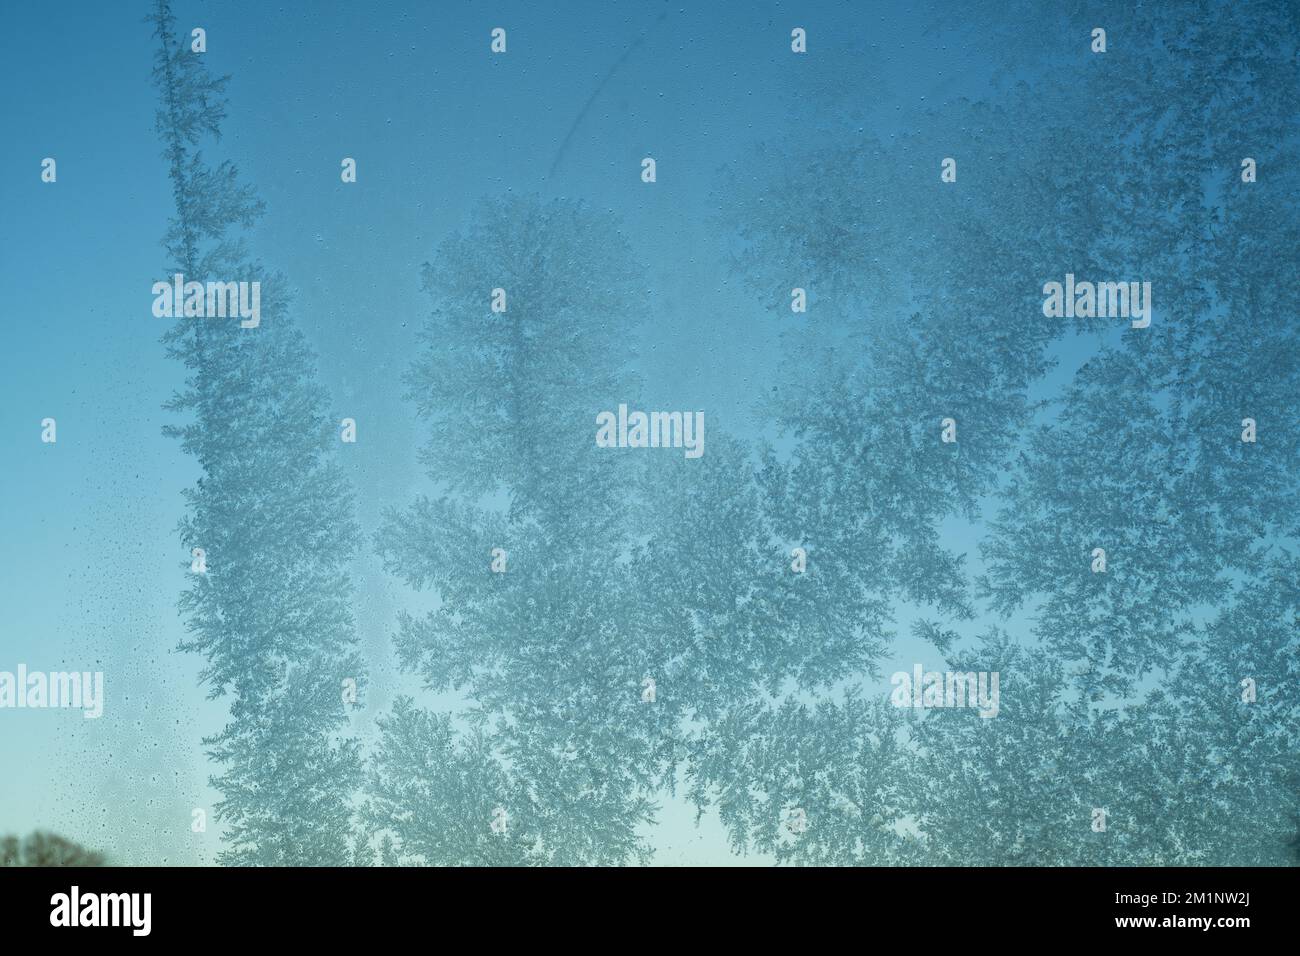 Frost patterns on glass window pane. Frosted glass with blue sky behind. Delicate crystals formed in cold weather. Stock Photo